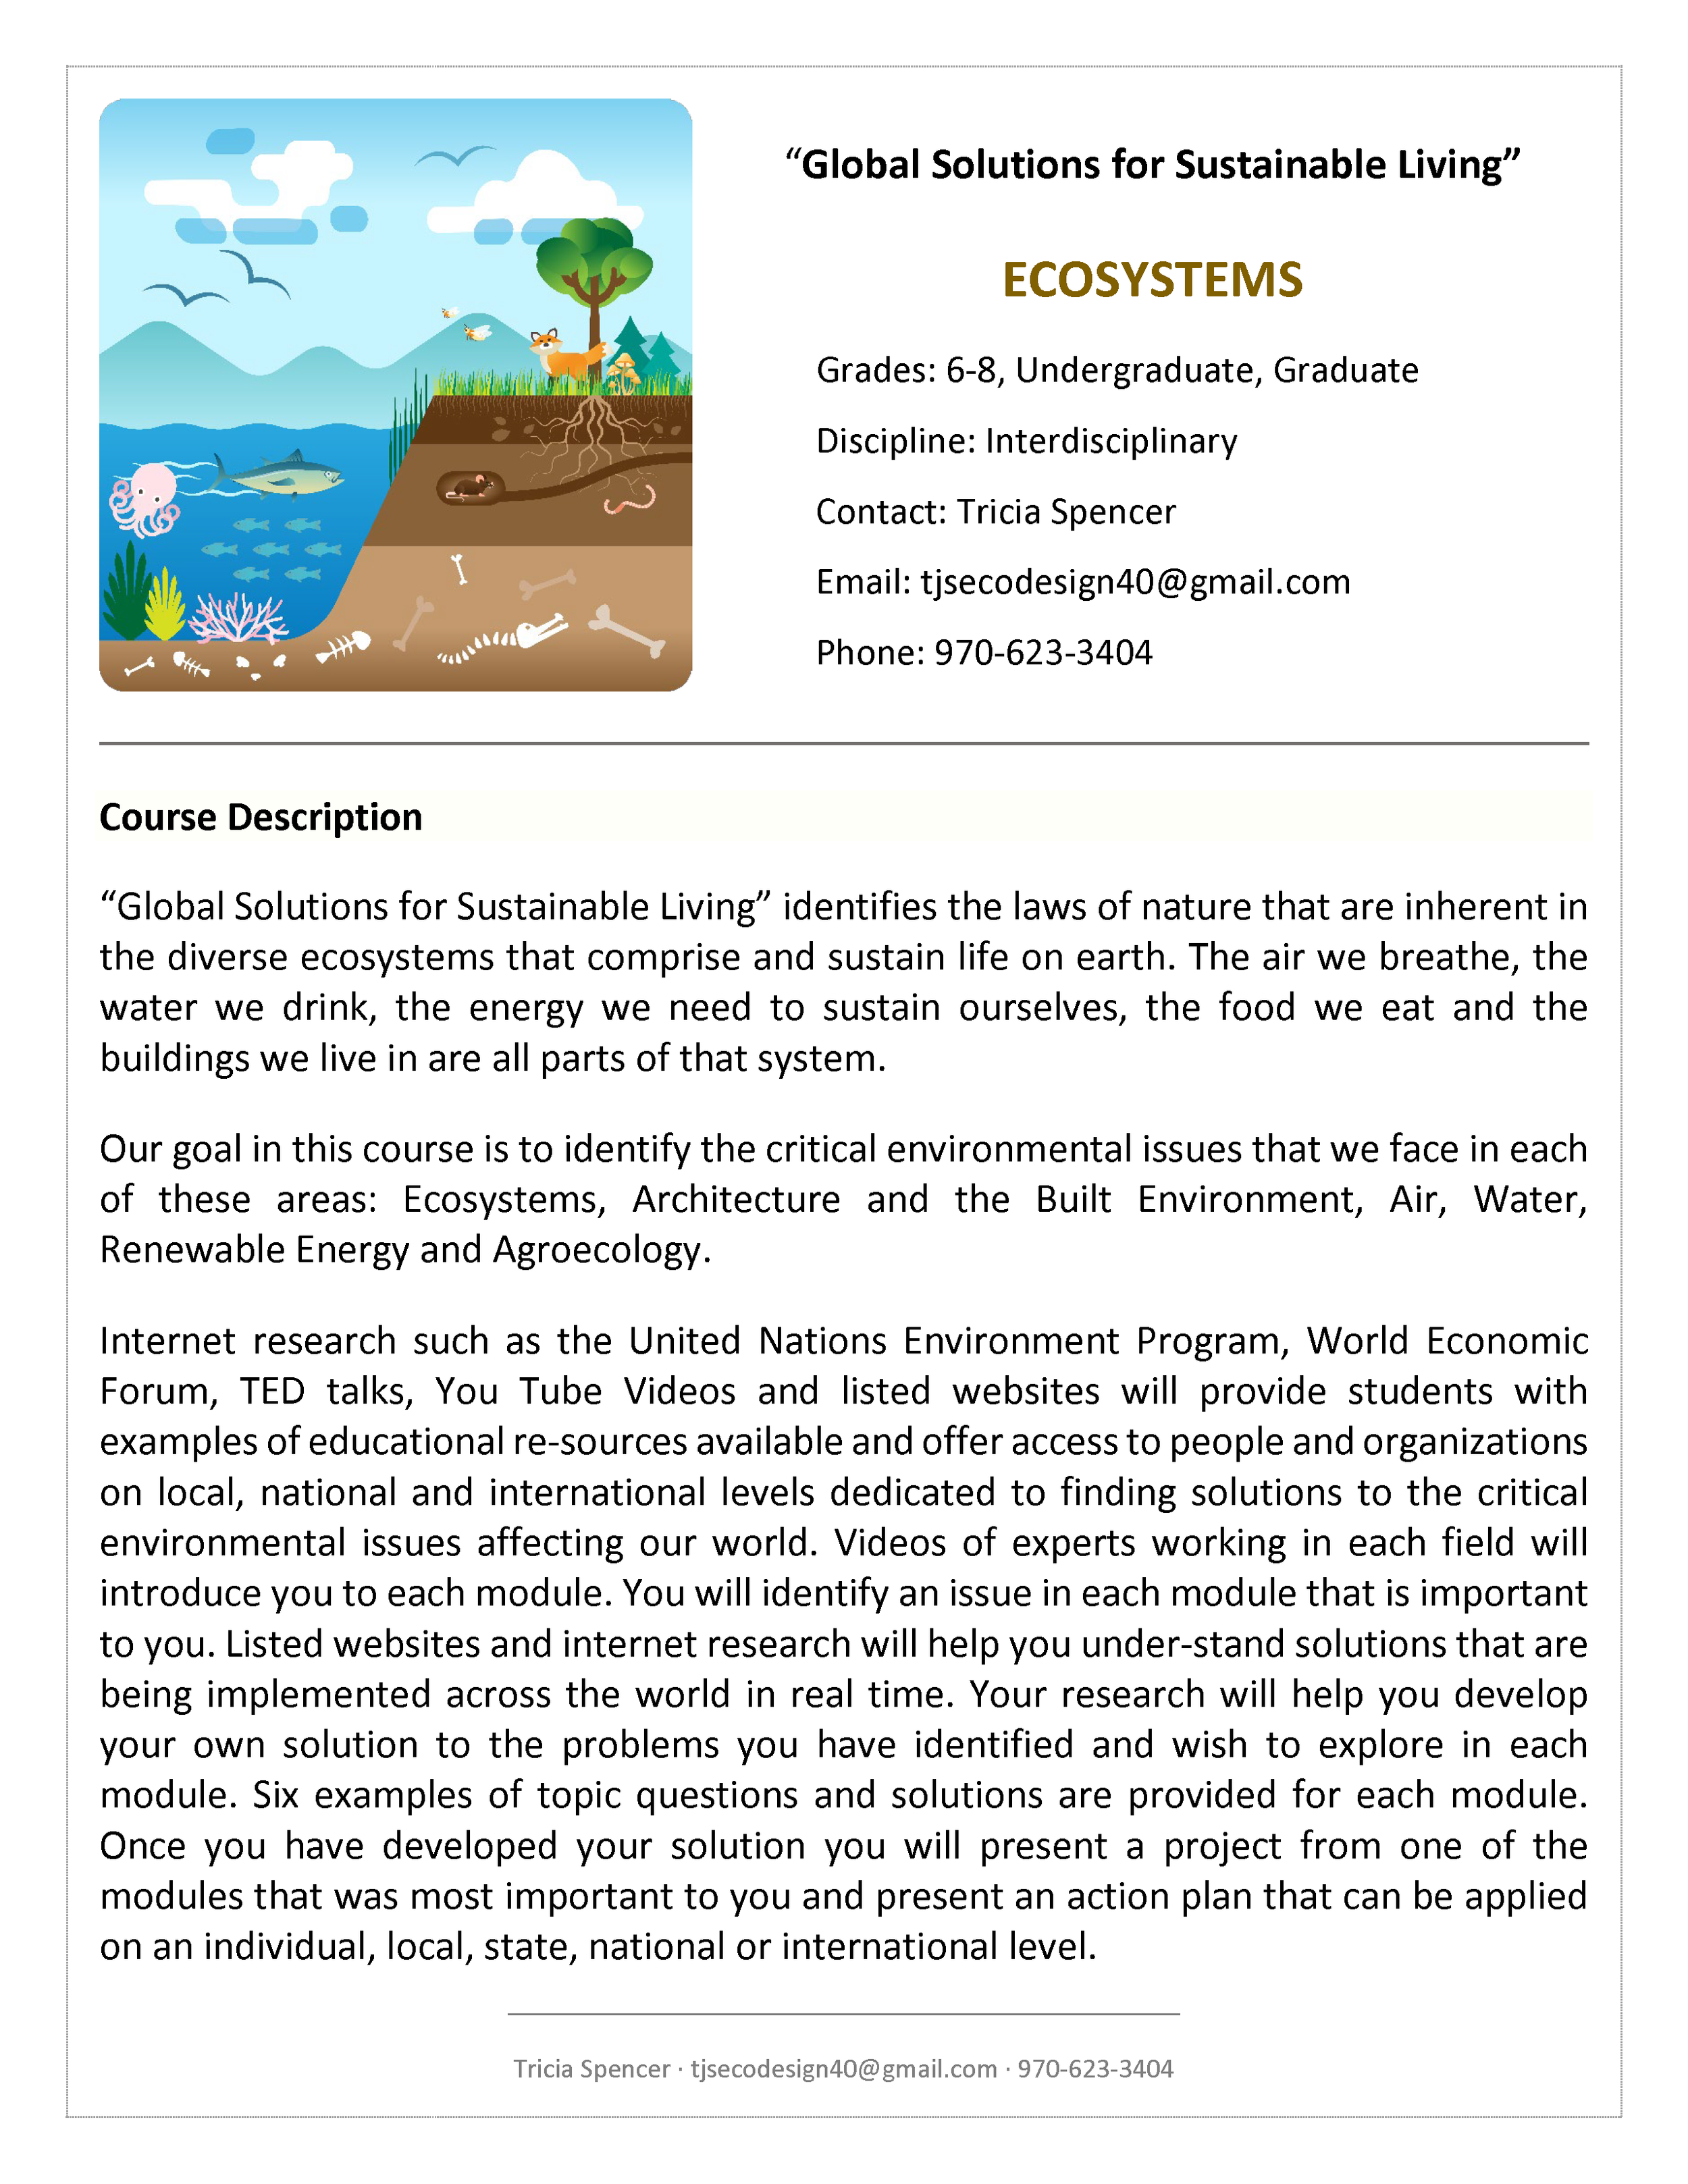 ecosystems_Page_1.png